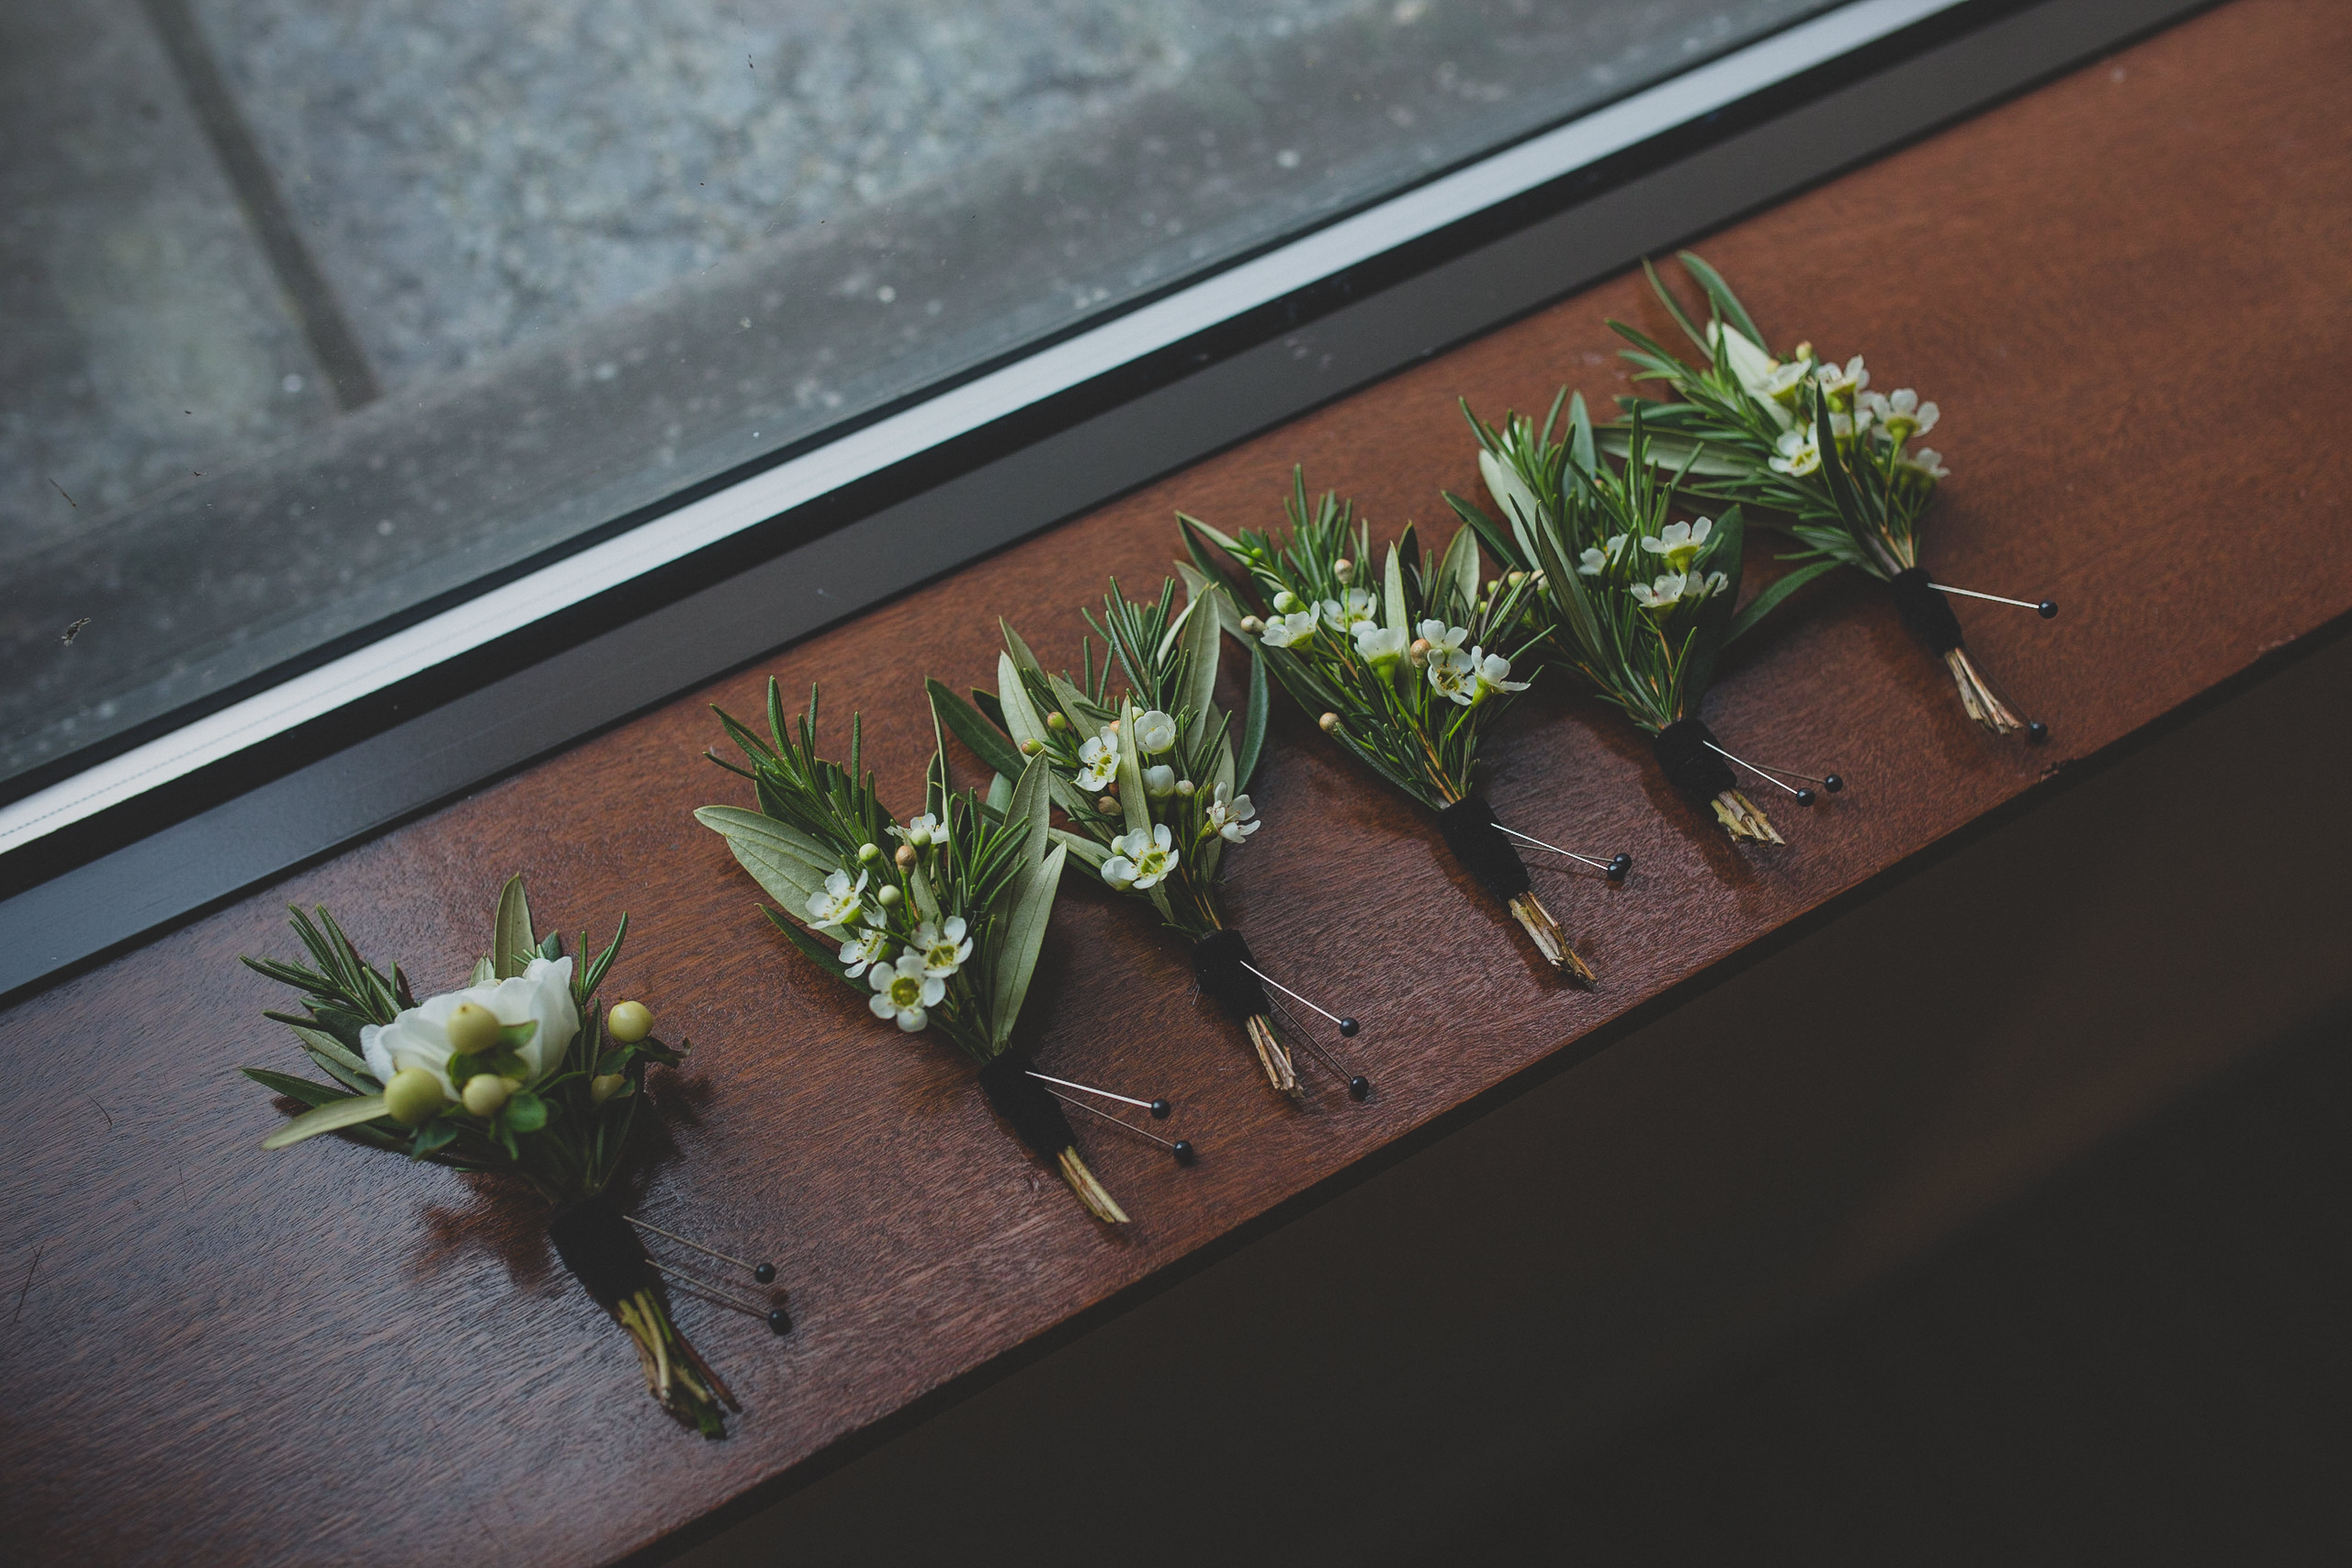 Winter wedding boutonnieres with rosemary, olive, and wax flower.